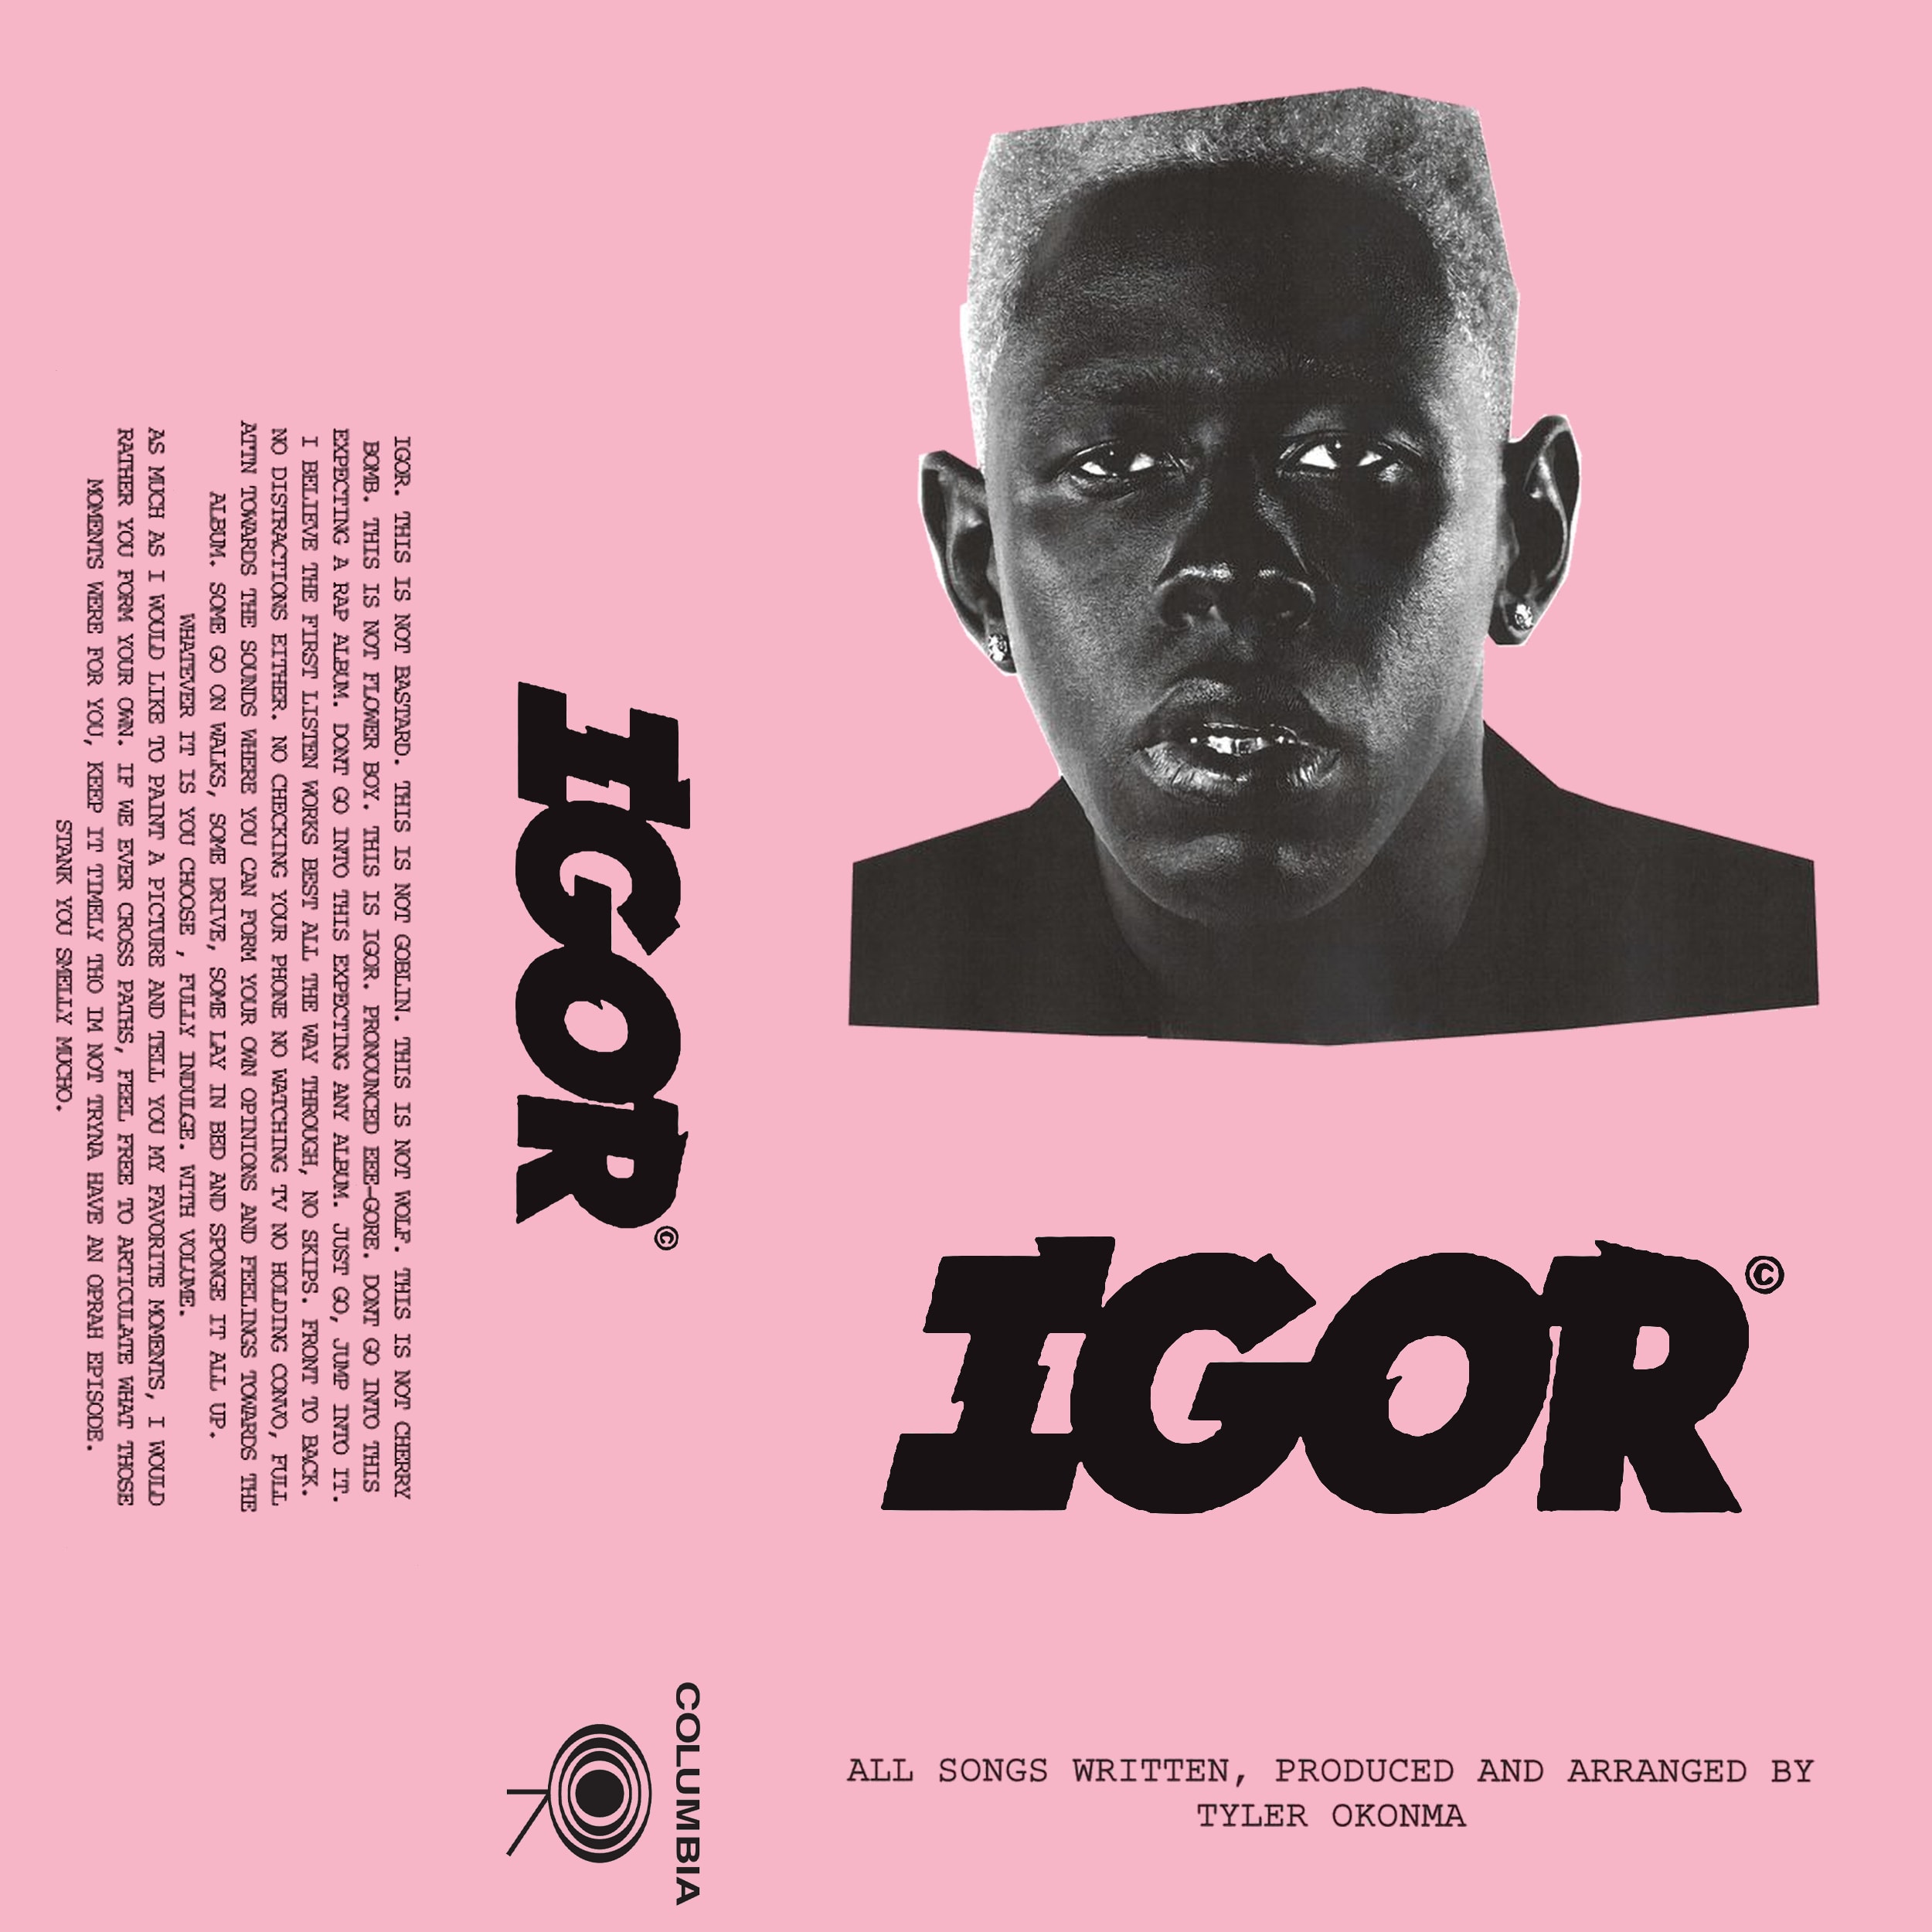 Who Did Tyler Create Igor For And Why? : r/tylerthecreator